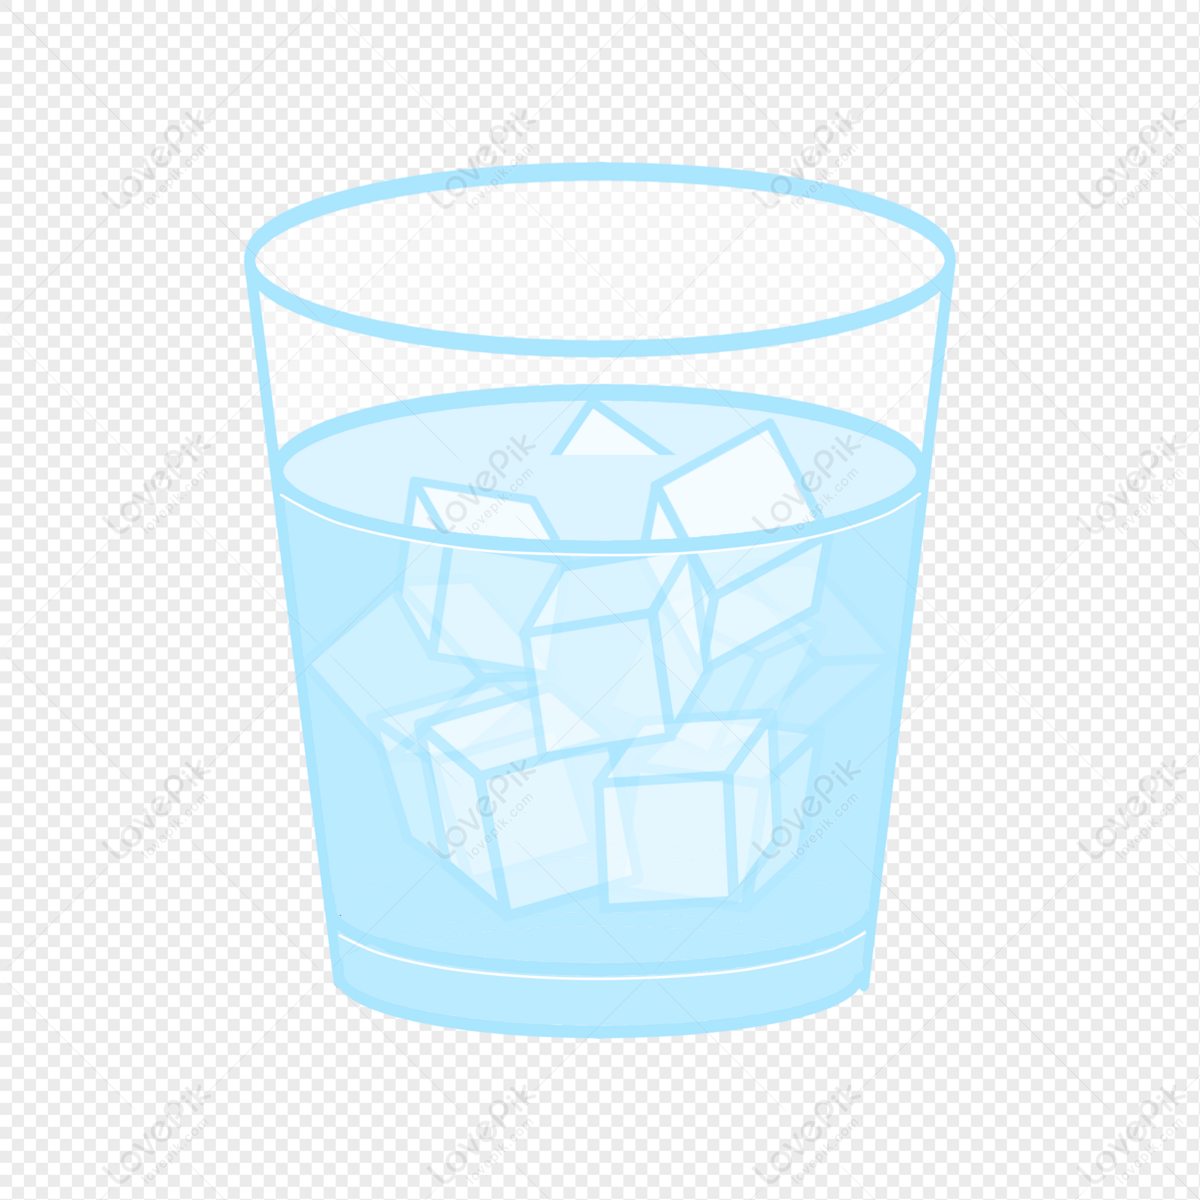 Hand Drawn Cartoon Summer Ice Water Free PNG And Clipart Image For Free  Download - Lovepik | 401194369